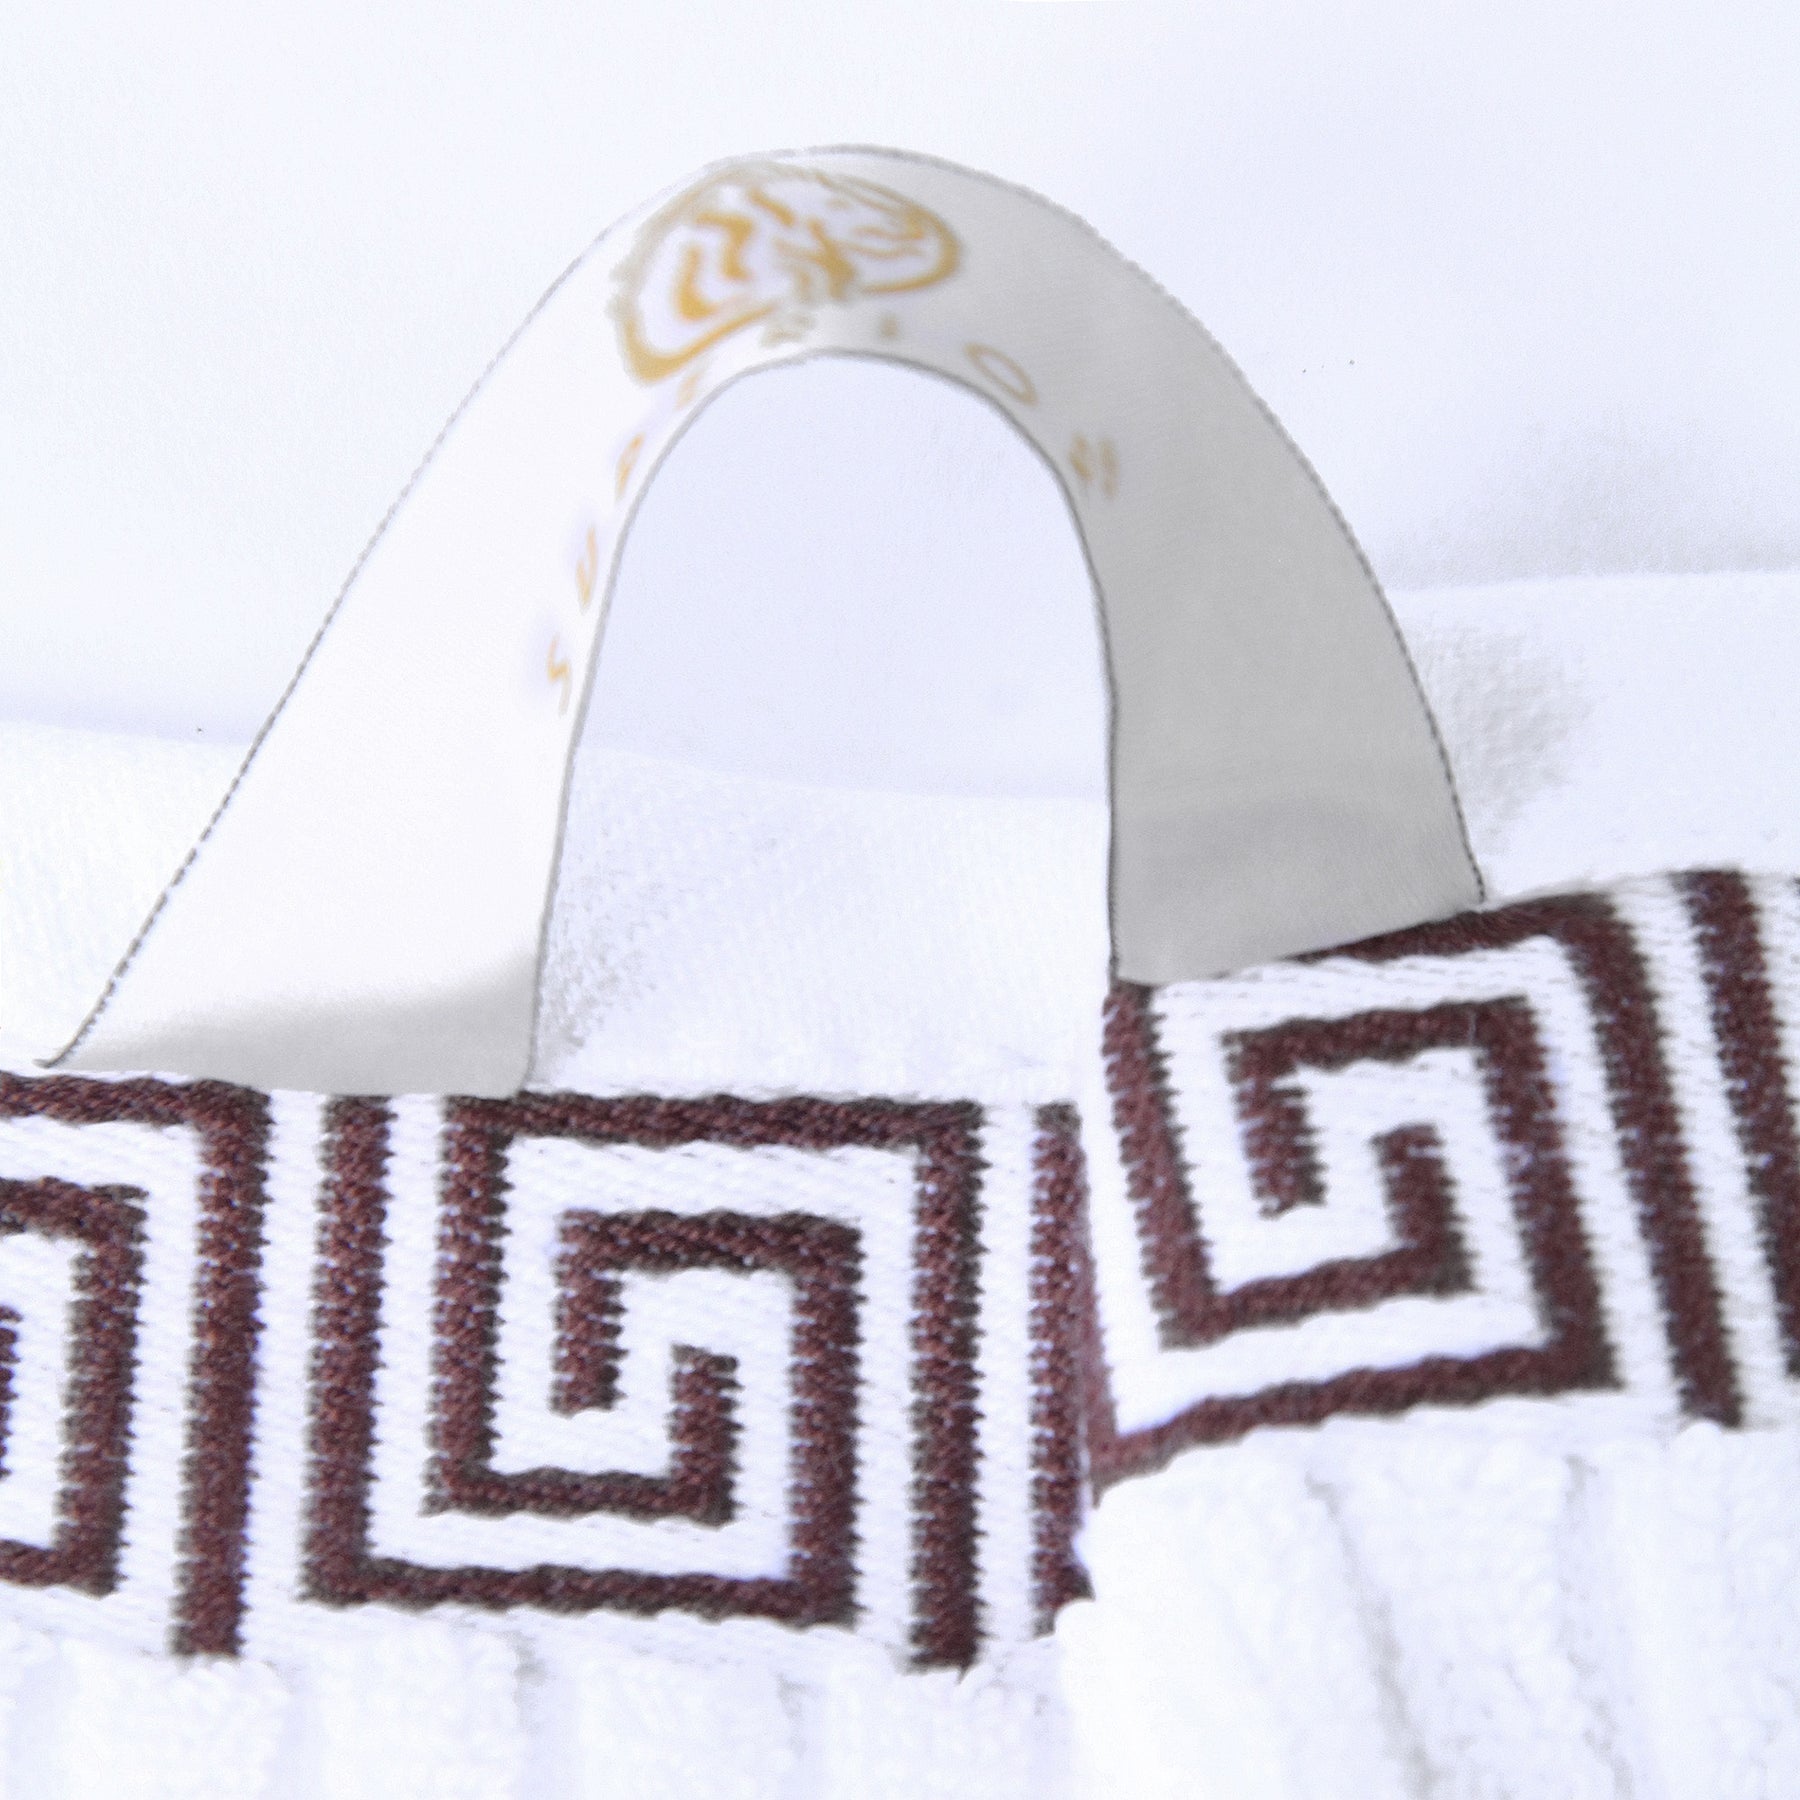 Superior Athens Cotton 6-Piece Assorted Towel Set with Greek Scroll and Floral Pattern - Chocolate